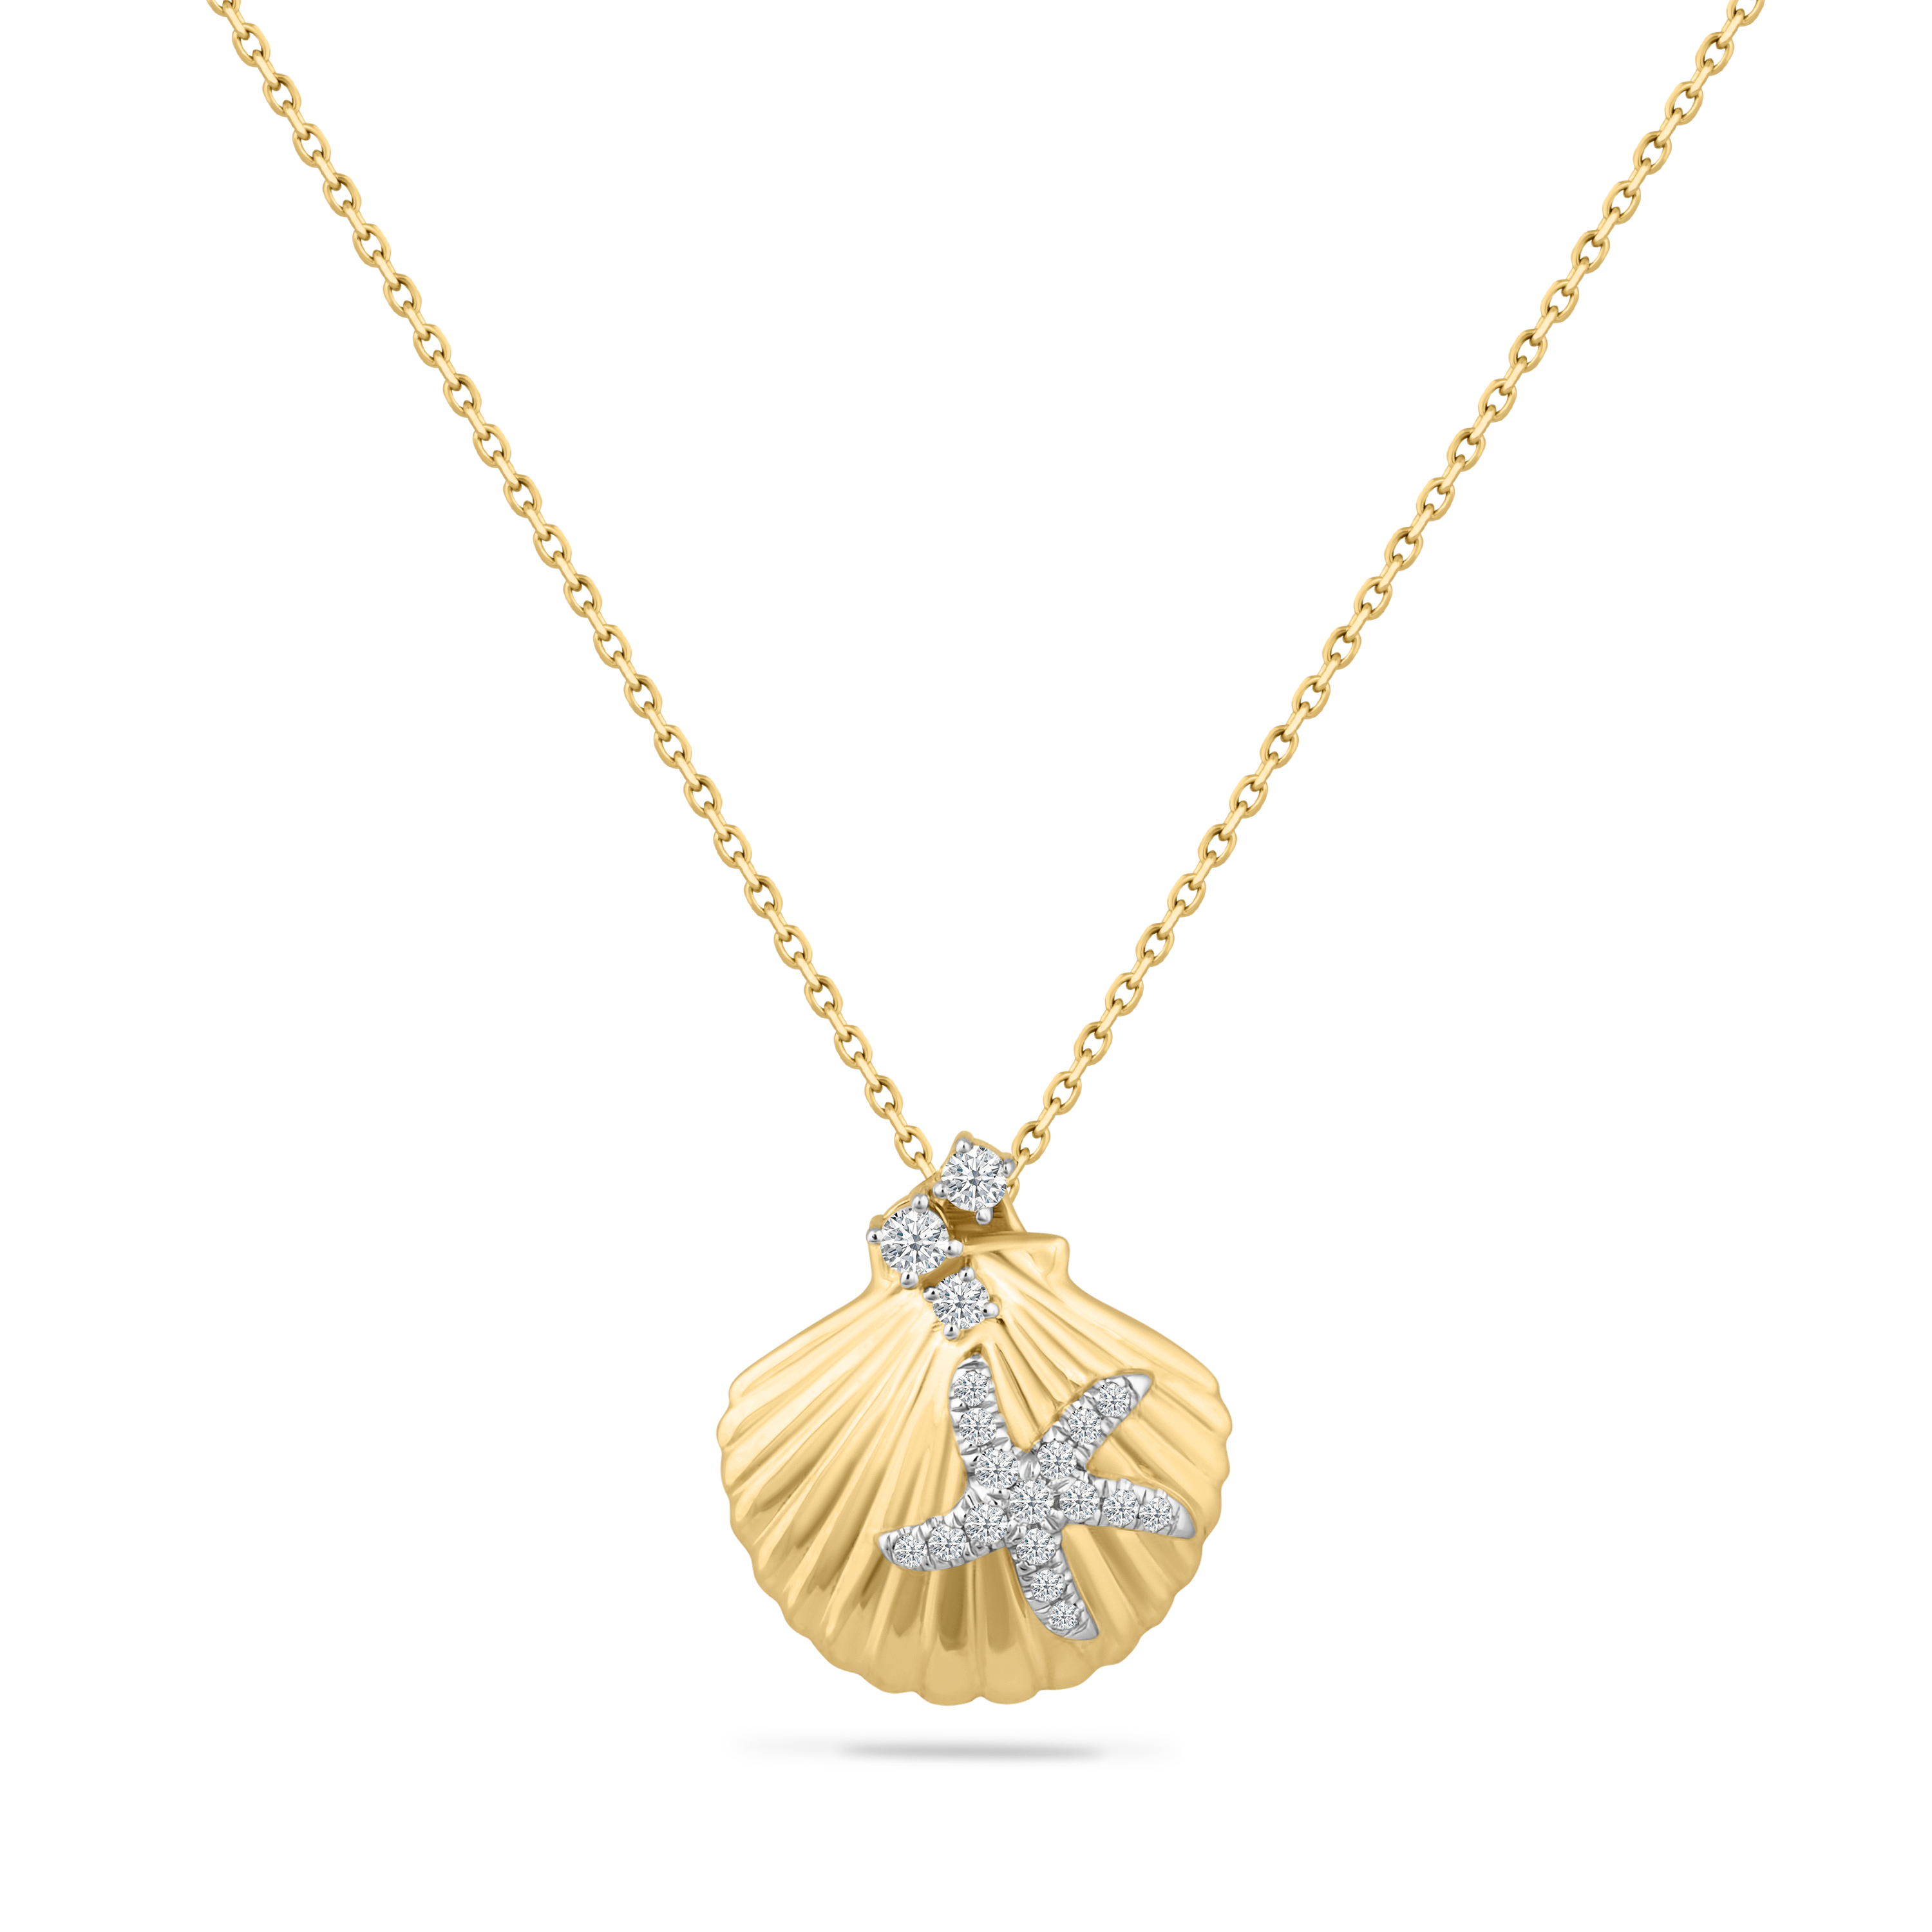 14K STARFISH ON SHELL PENDANT WITH 19 DIAMONDS 0.14CT ON 18 INCHES CABLE CHAIN